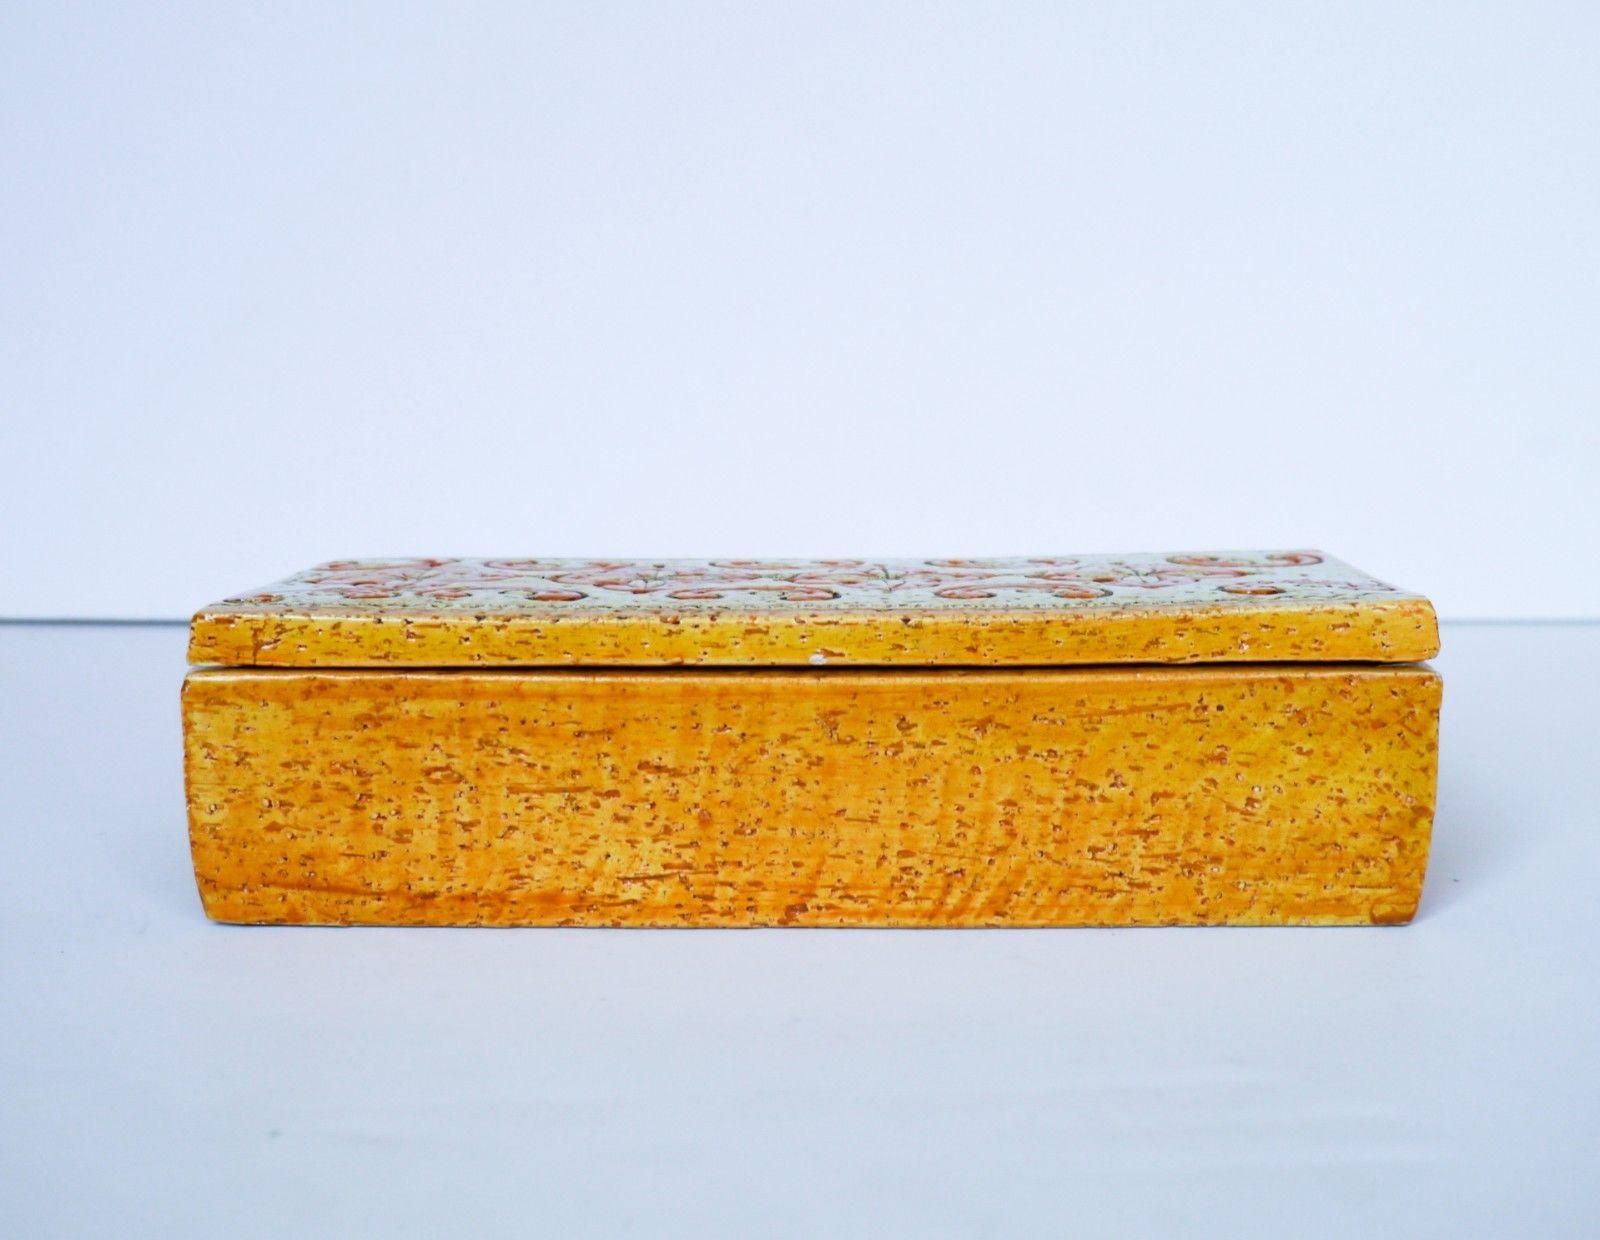 Beautiful Italian ceramic box by Aldo Londi. Yellow and orange box with decorative design. Good vintage condition.

10 more ceramic boxes available in separate listings.